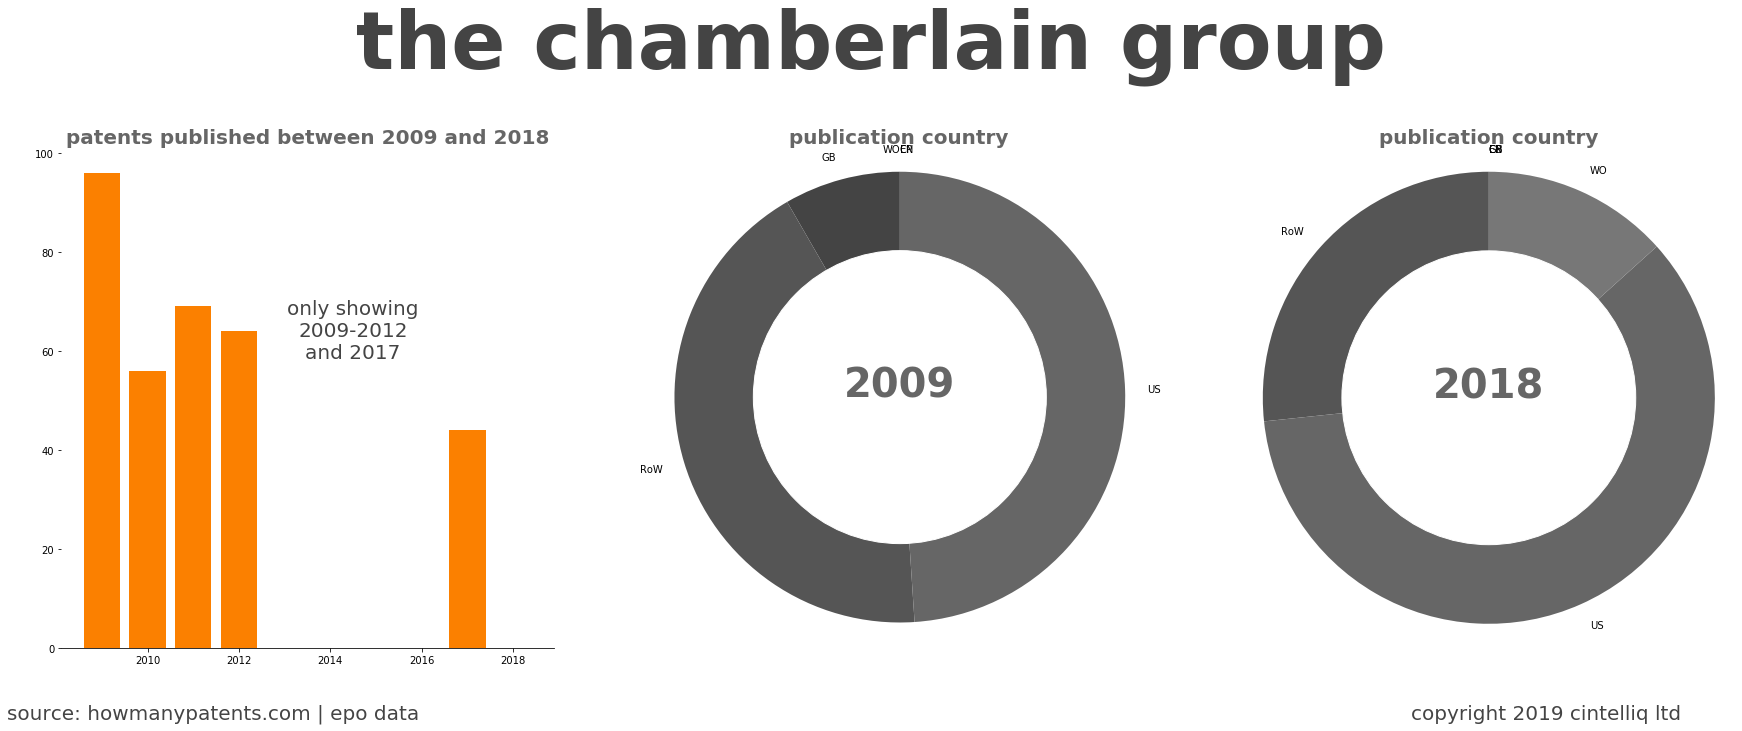 summary of patents for The Chamberlain Group